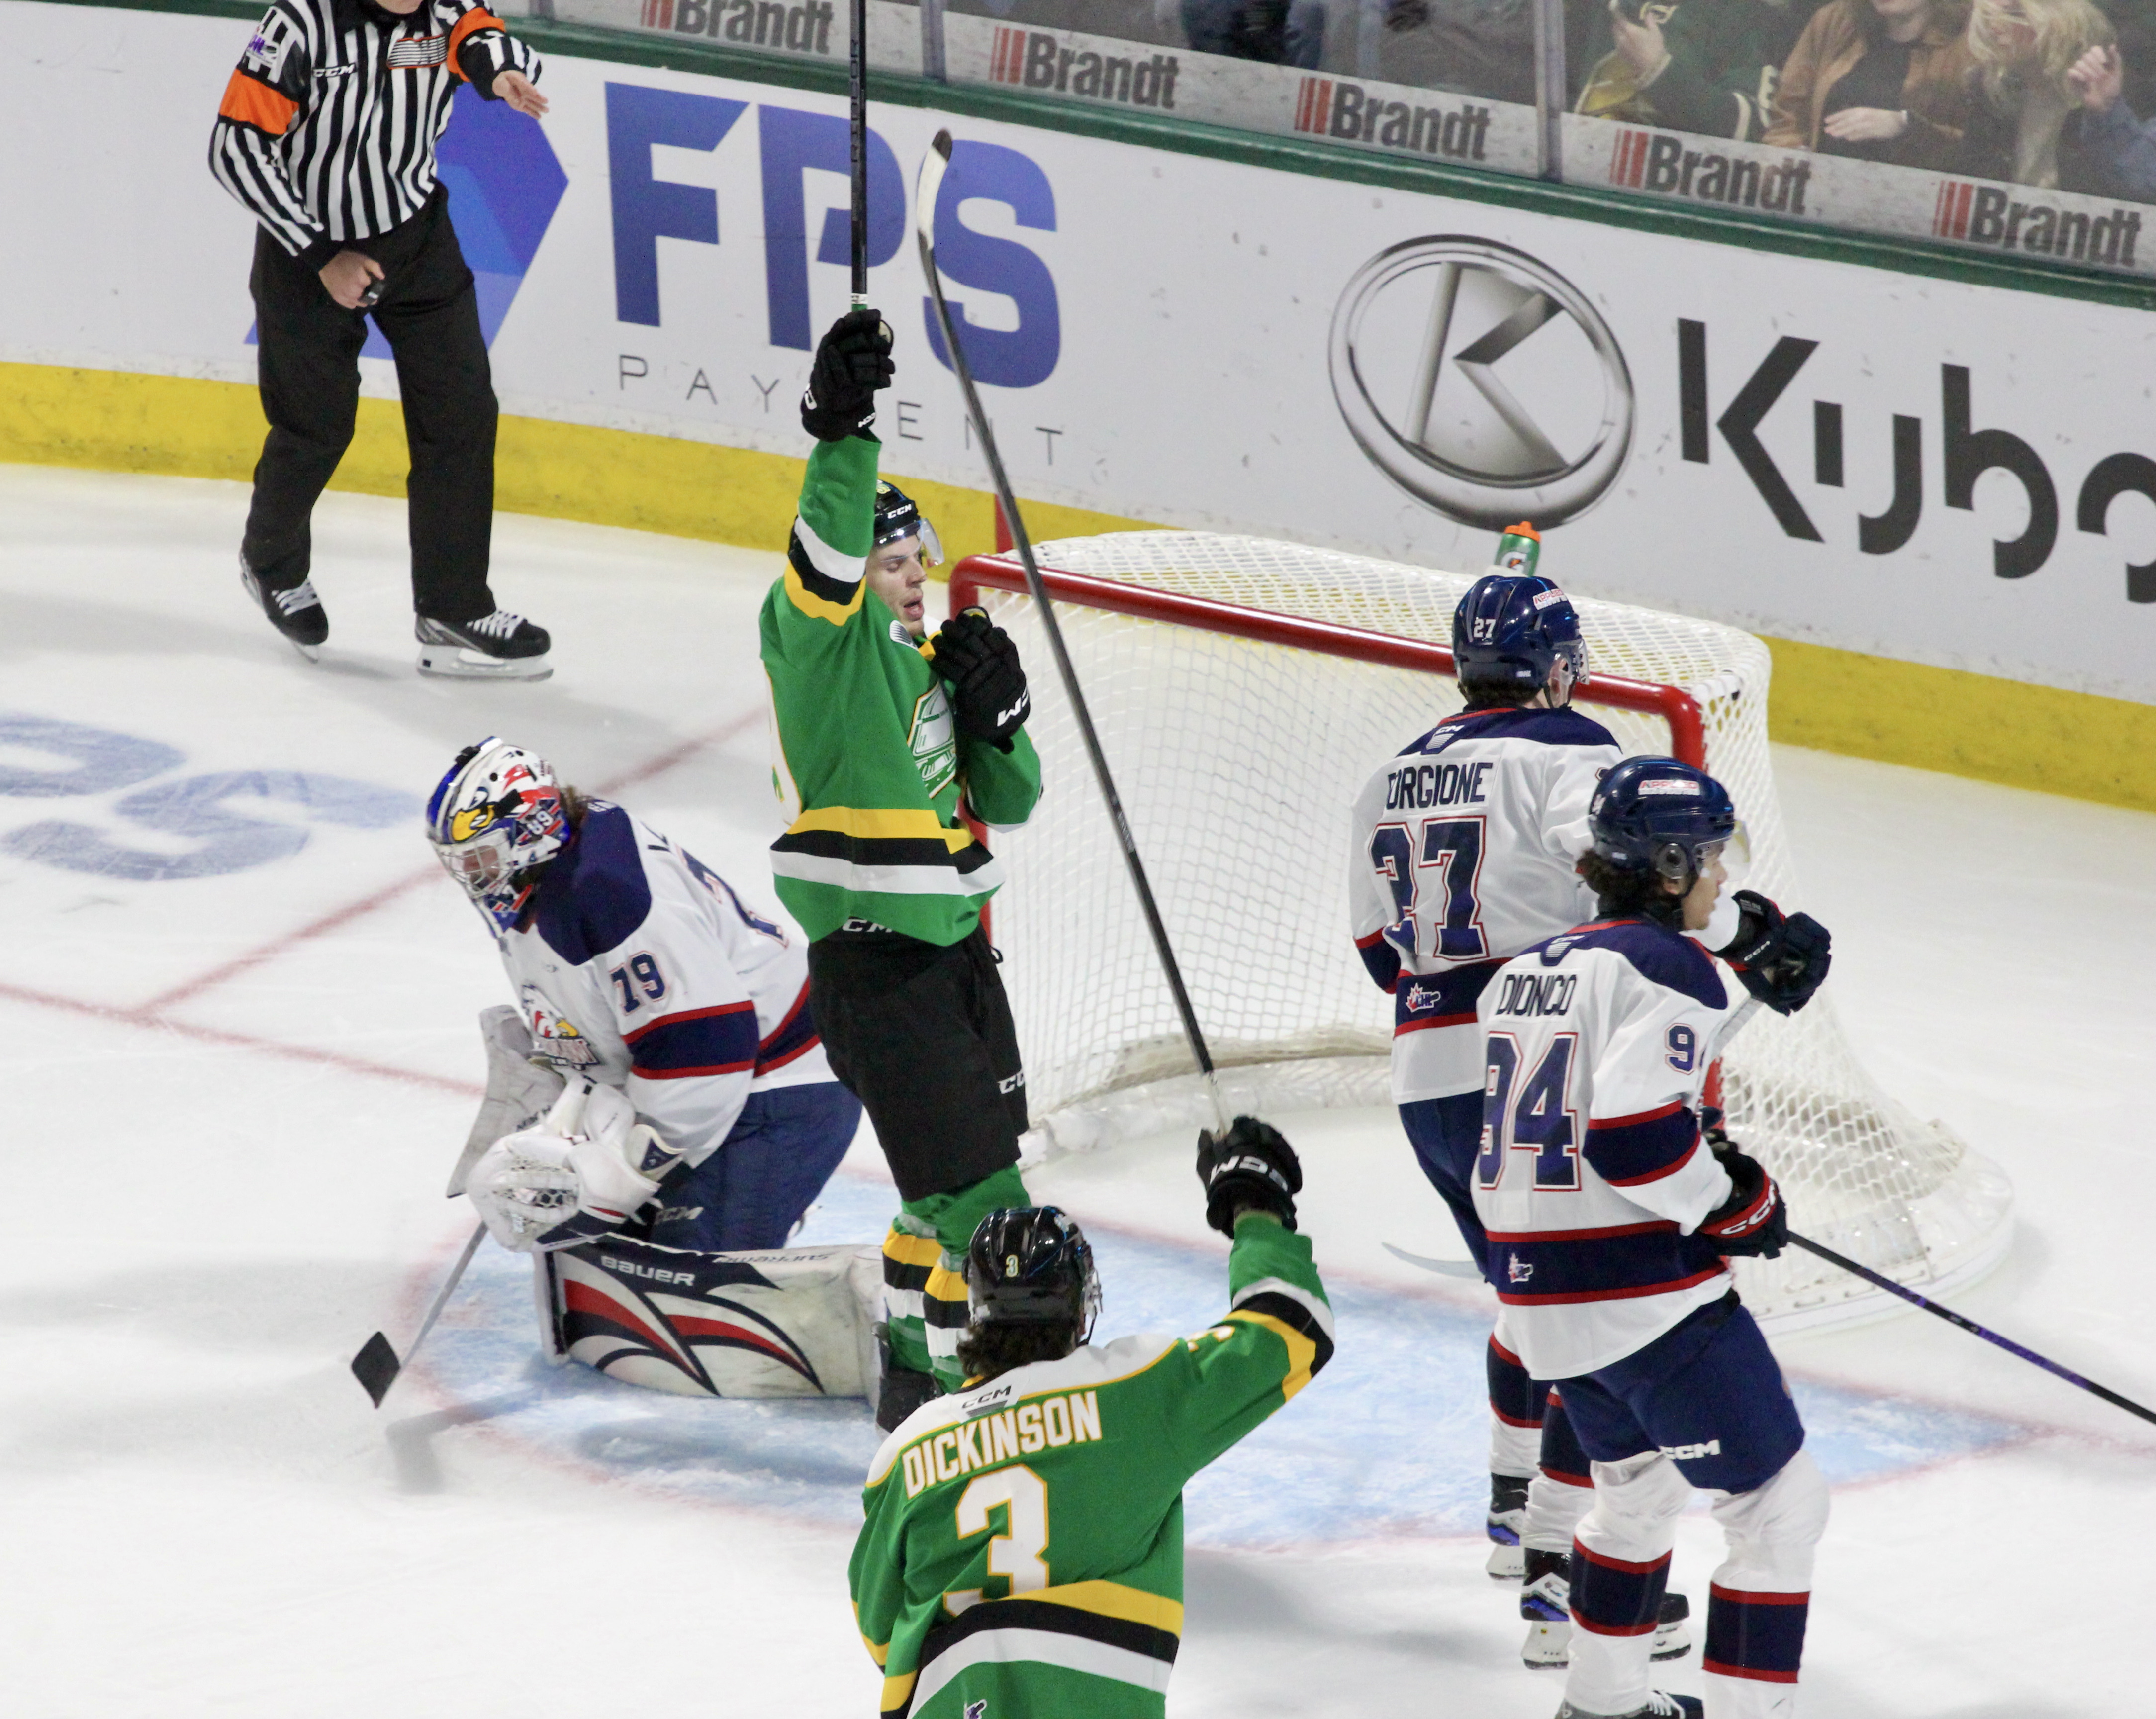 Second straight 3-1 win by London Knights, up 2-0 in Western Conference Championship